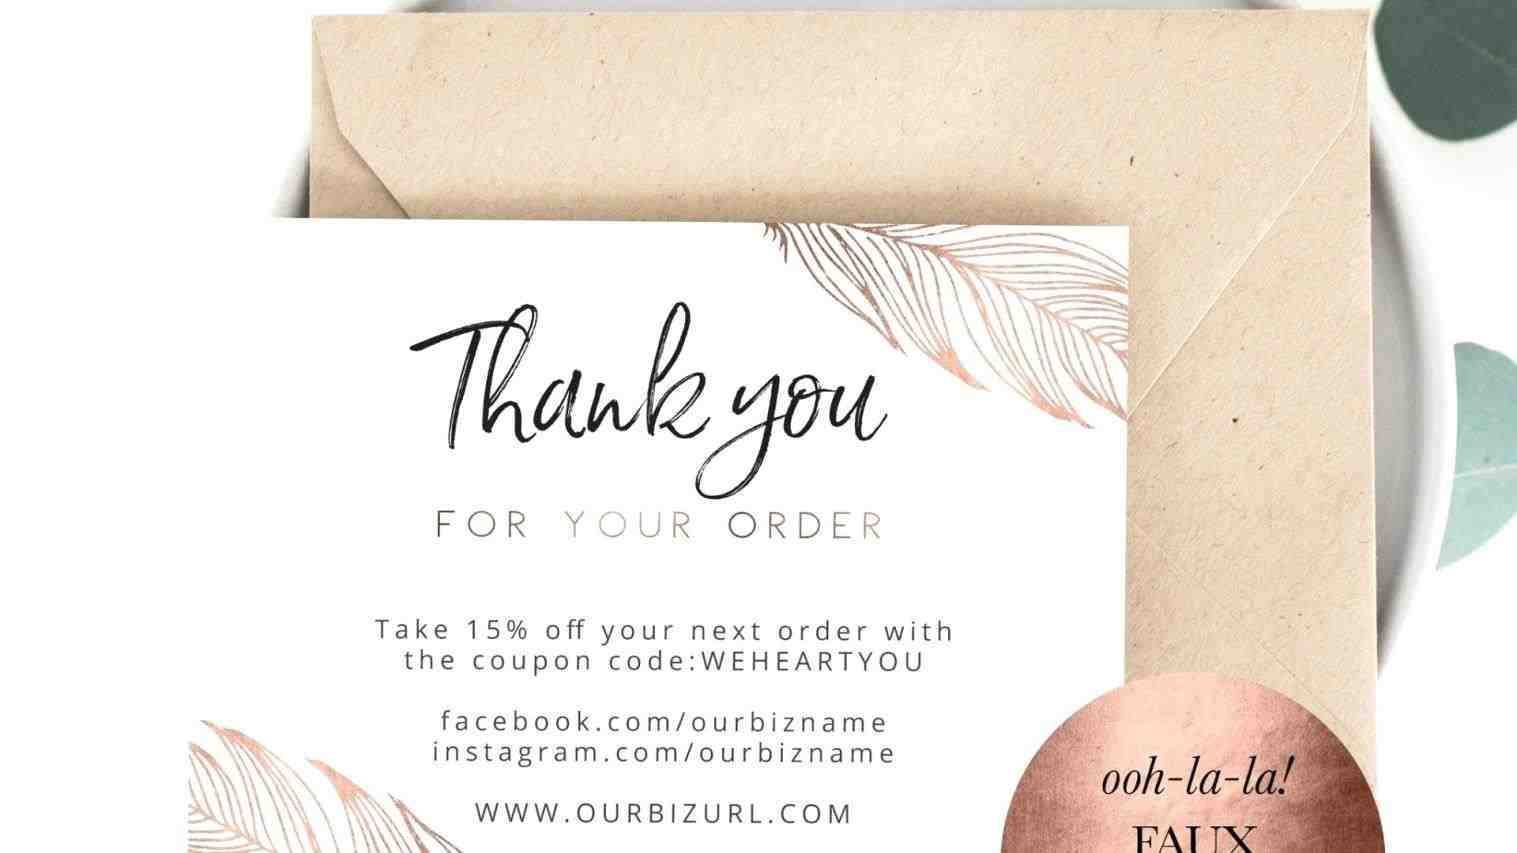 45 Visiting Thank You For Your Order Card Template Download with Thank You For Your Order Card Template